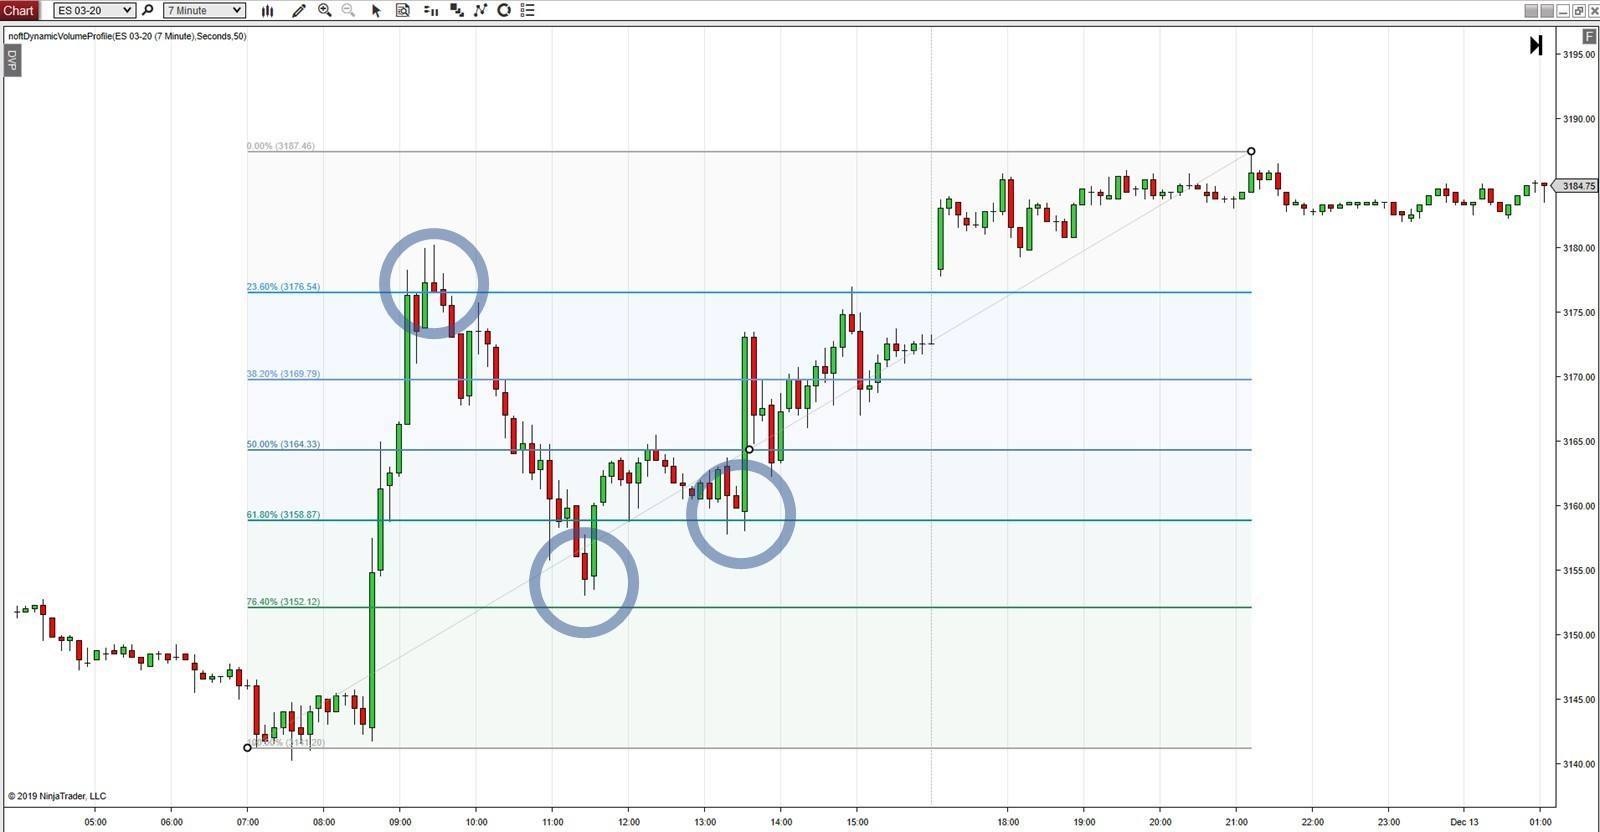 Fibonacci retracement added to a chart makes entrances easy to see.